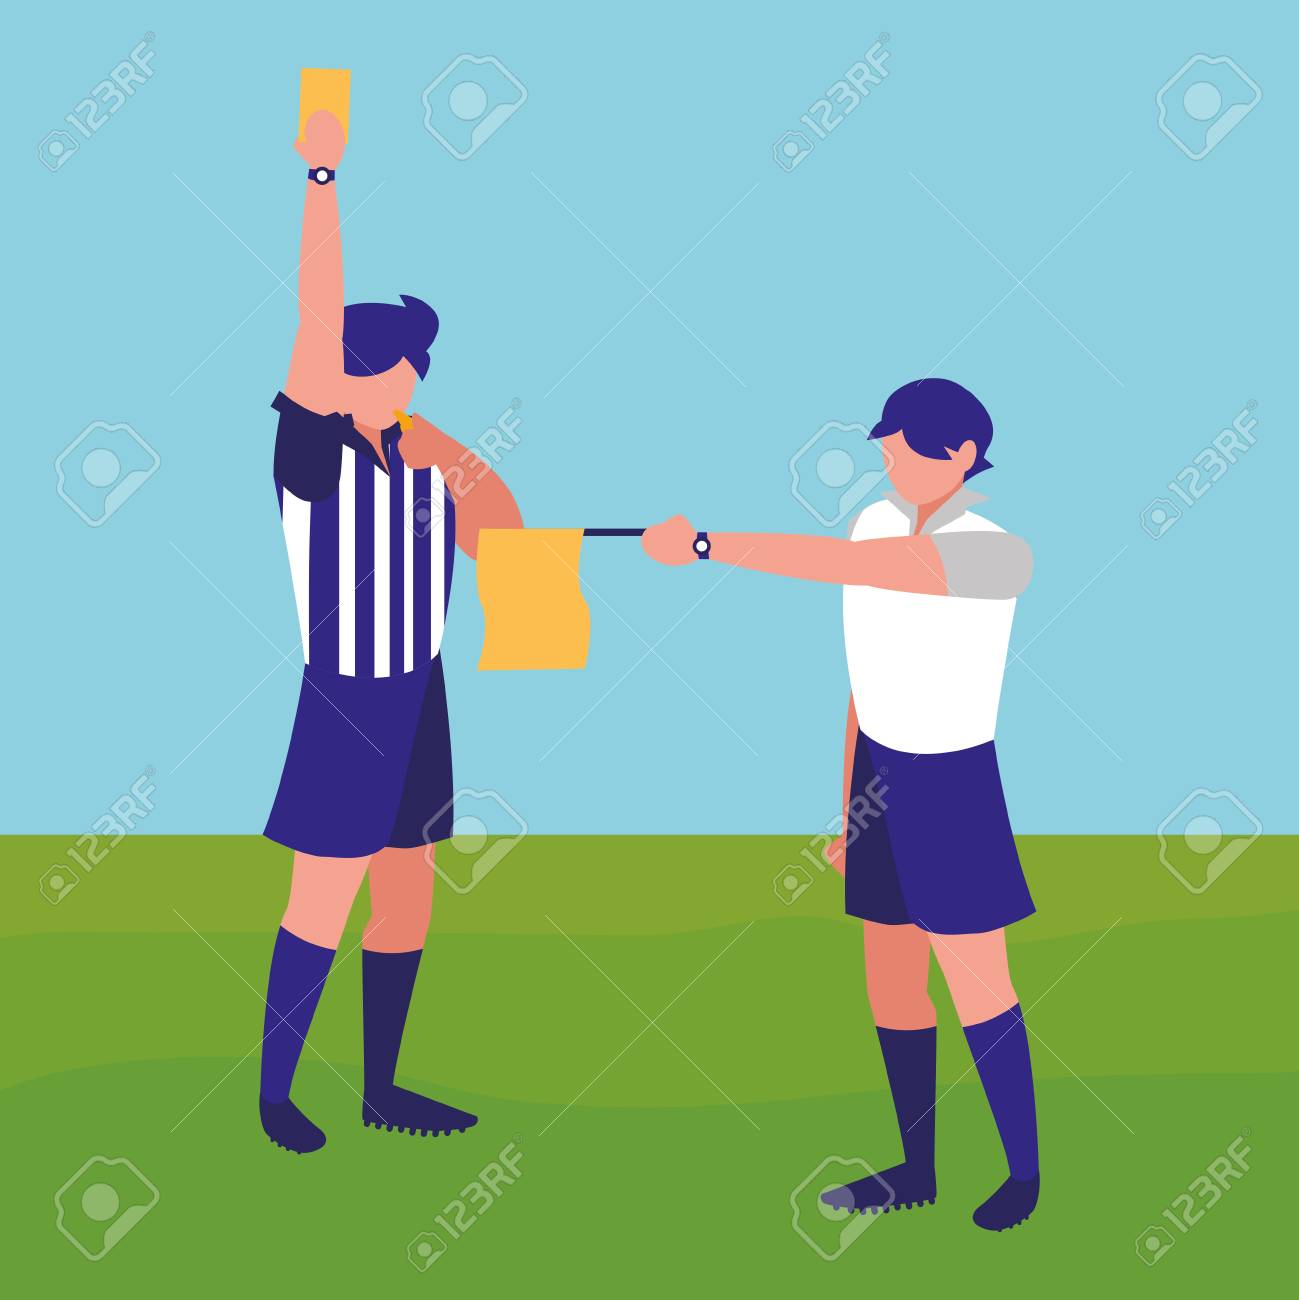 Avatar Soccer Referees Showing A Yellow Card Over Field Background